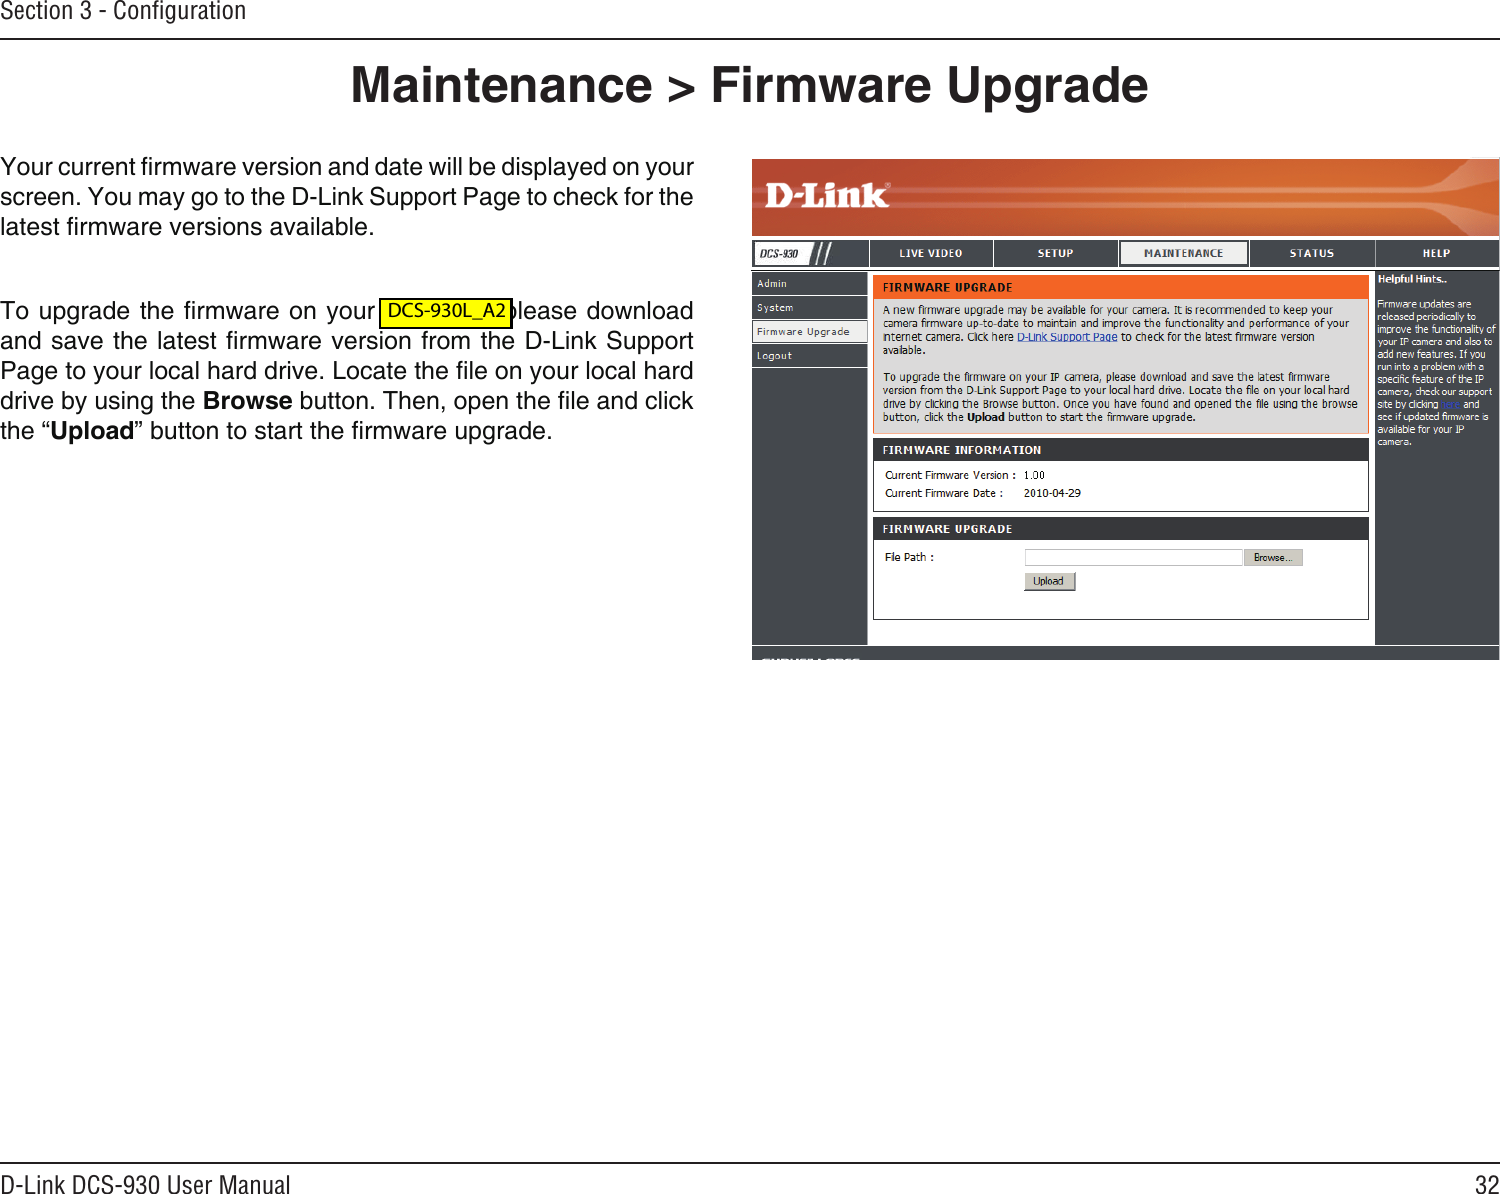 32D-Link DCS-930 User ManualSection 3 - ConﬁgurationMaintenance &gt; Firmware UpgradeYour current rmware version and date will be displayed on your screen. You may go to the D-Link Support Page to check for the latest rmware versions available. To upgrade the rmware on your DCS-930, please download and save the latest rmware version from the D-Link Support Page to your local hard drive. Locate the le on your local hard drive by using the Browse button. Then, open the le and click the “Upload” button to start the rmware upgrade. DCS-930L_A2